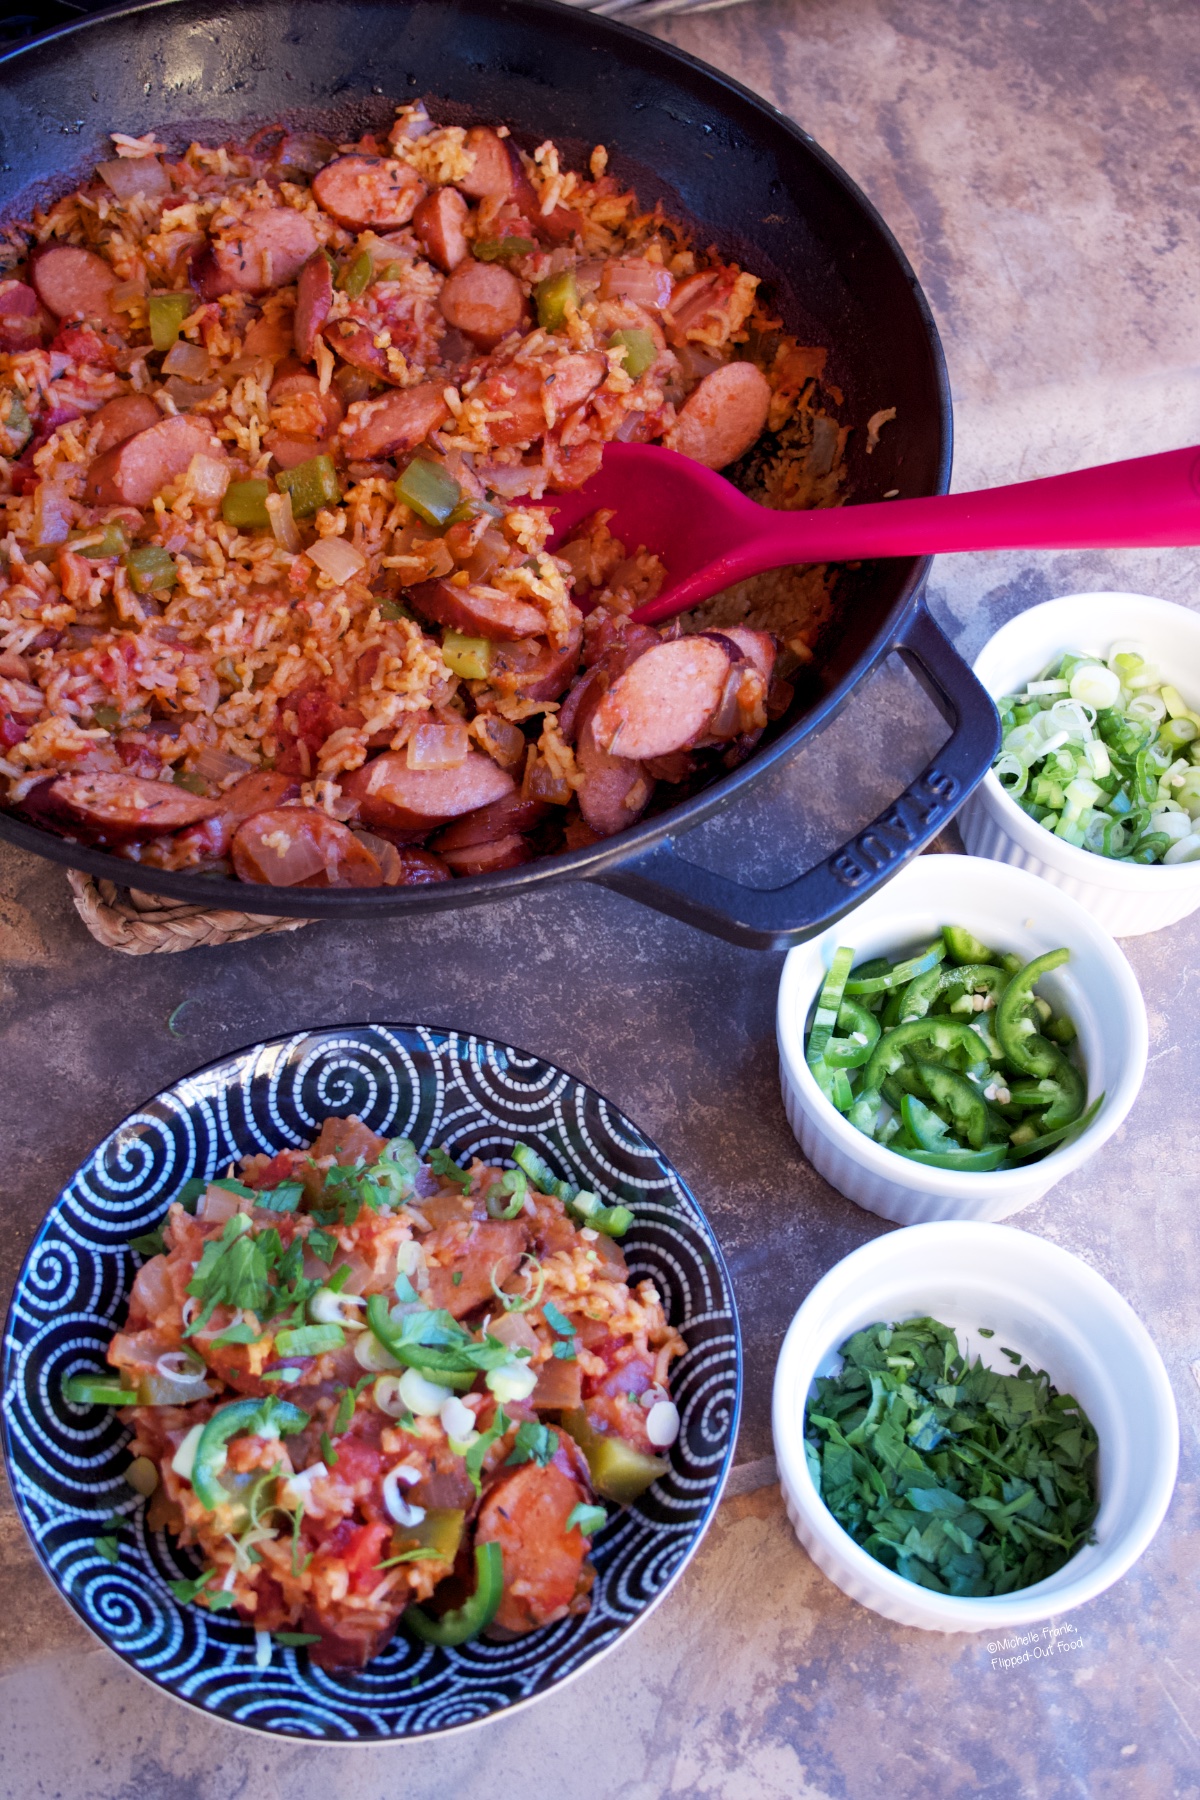 Cajun Sausage Rice Skillet with a serving dished out into a bowl in the foreground. Ramekins with scallions, jalapenos, and parsley sit to the side.